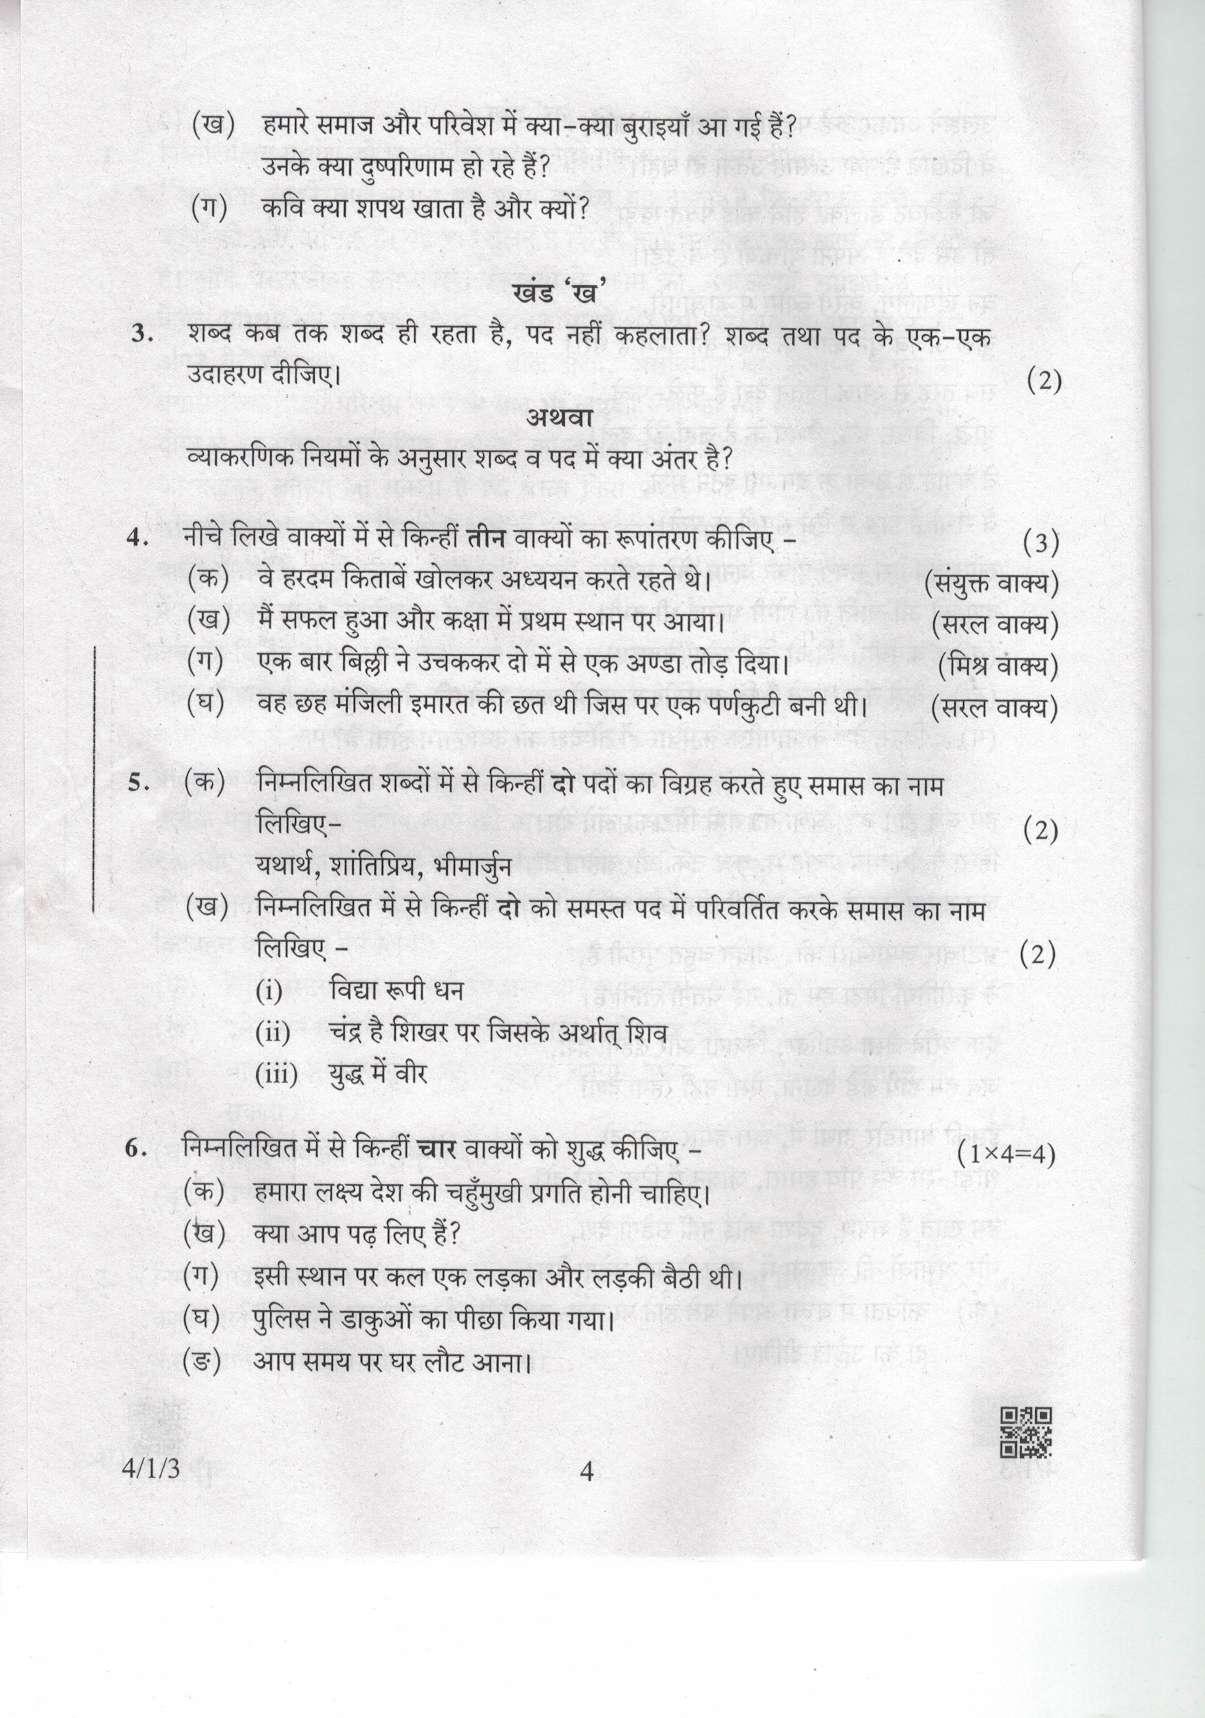 CBSE Class 10 4-1-3 Hindi-B 2019 Question Paper - Page 4